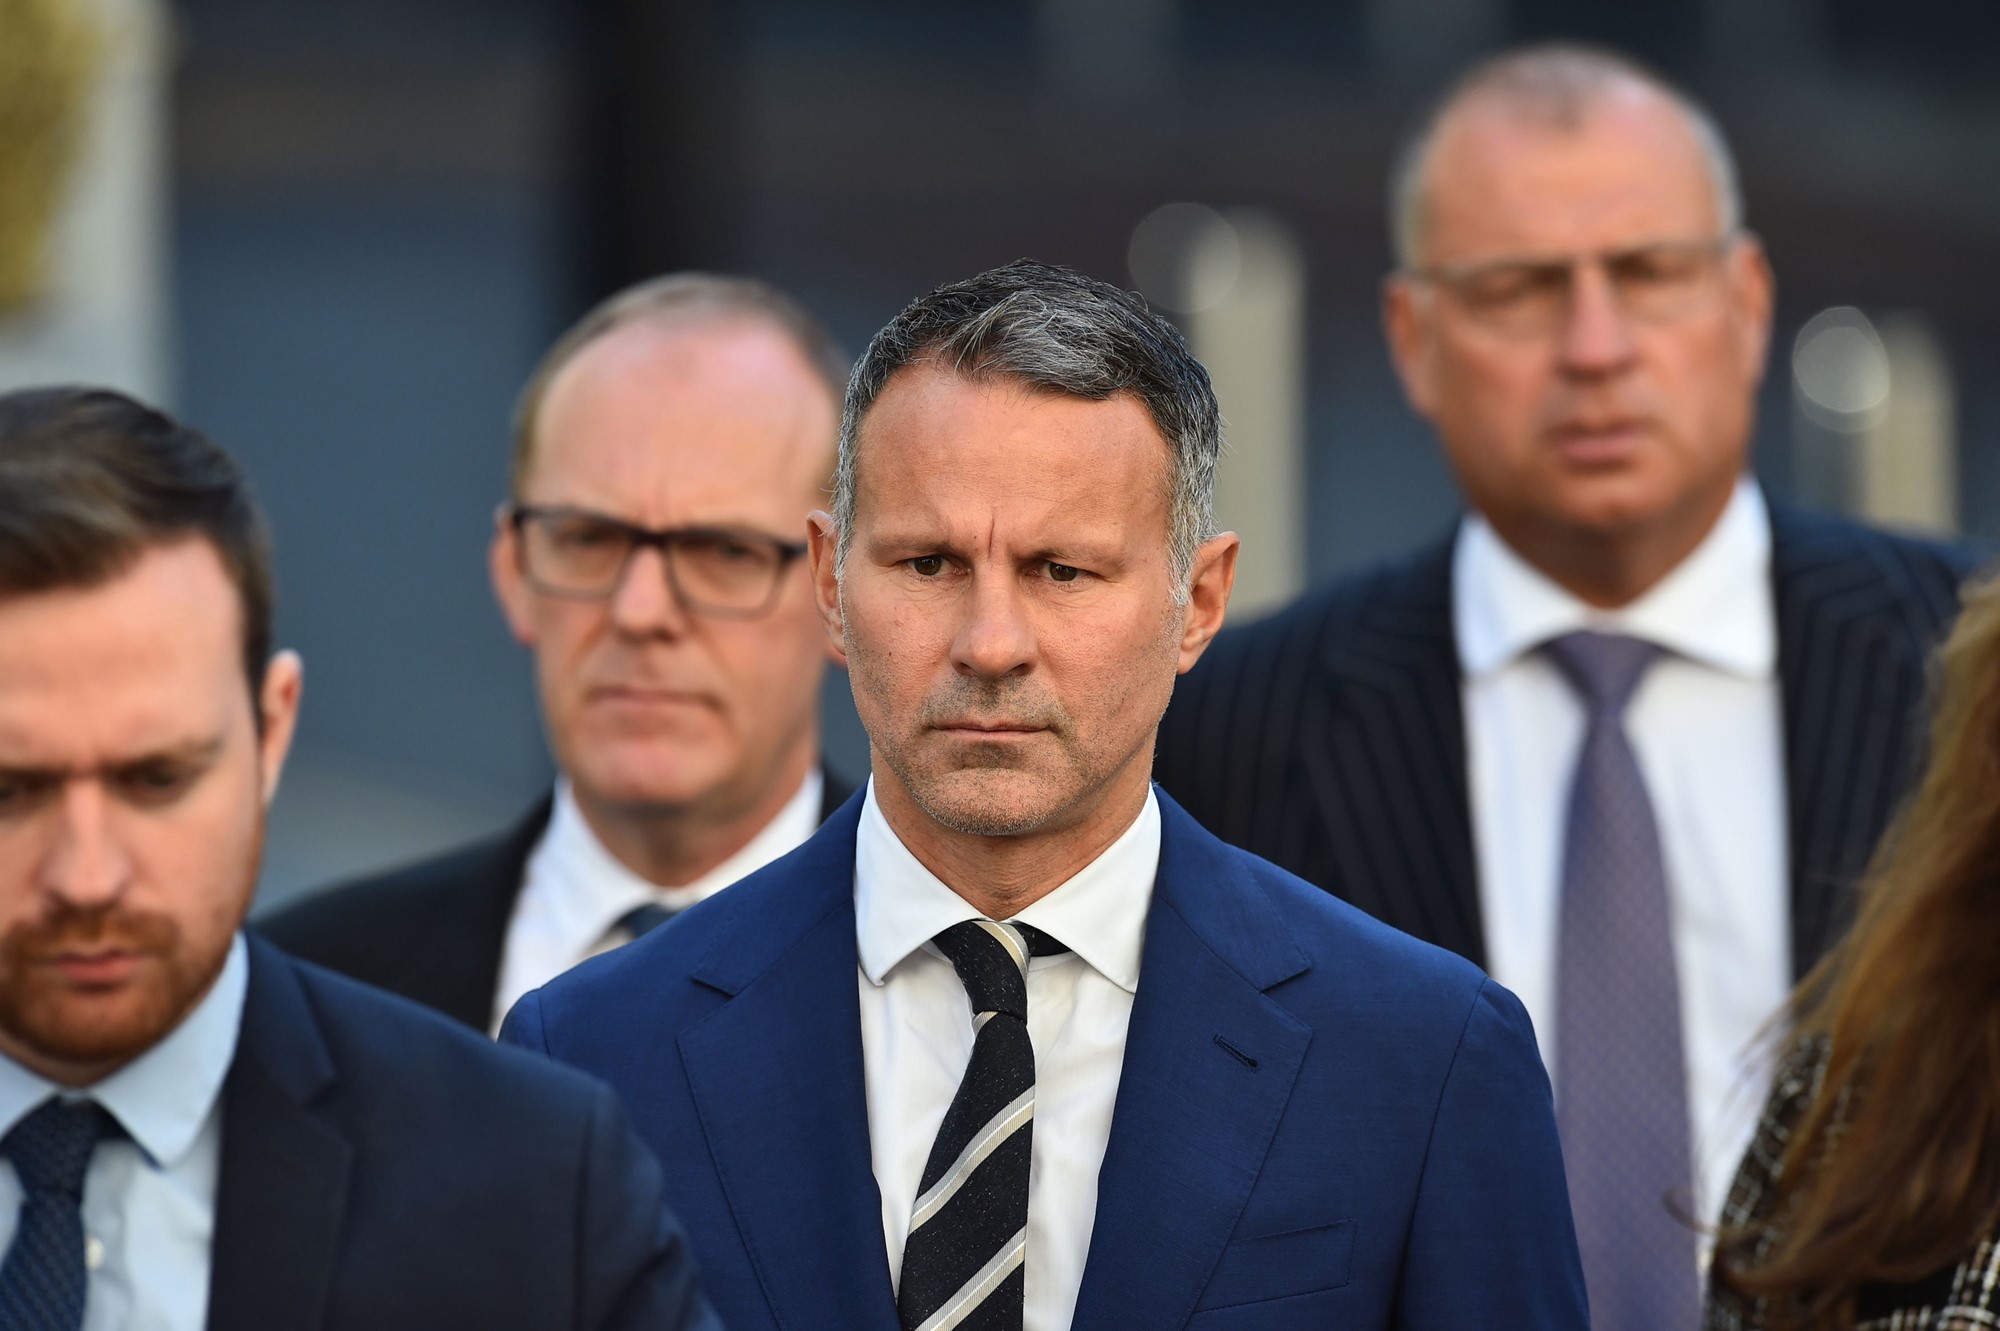 Former Manchester United footballer Ryan Giggs, centre, arrives at Manchester Crown Court